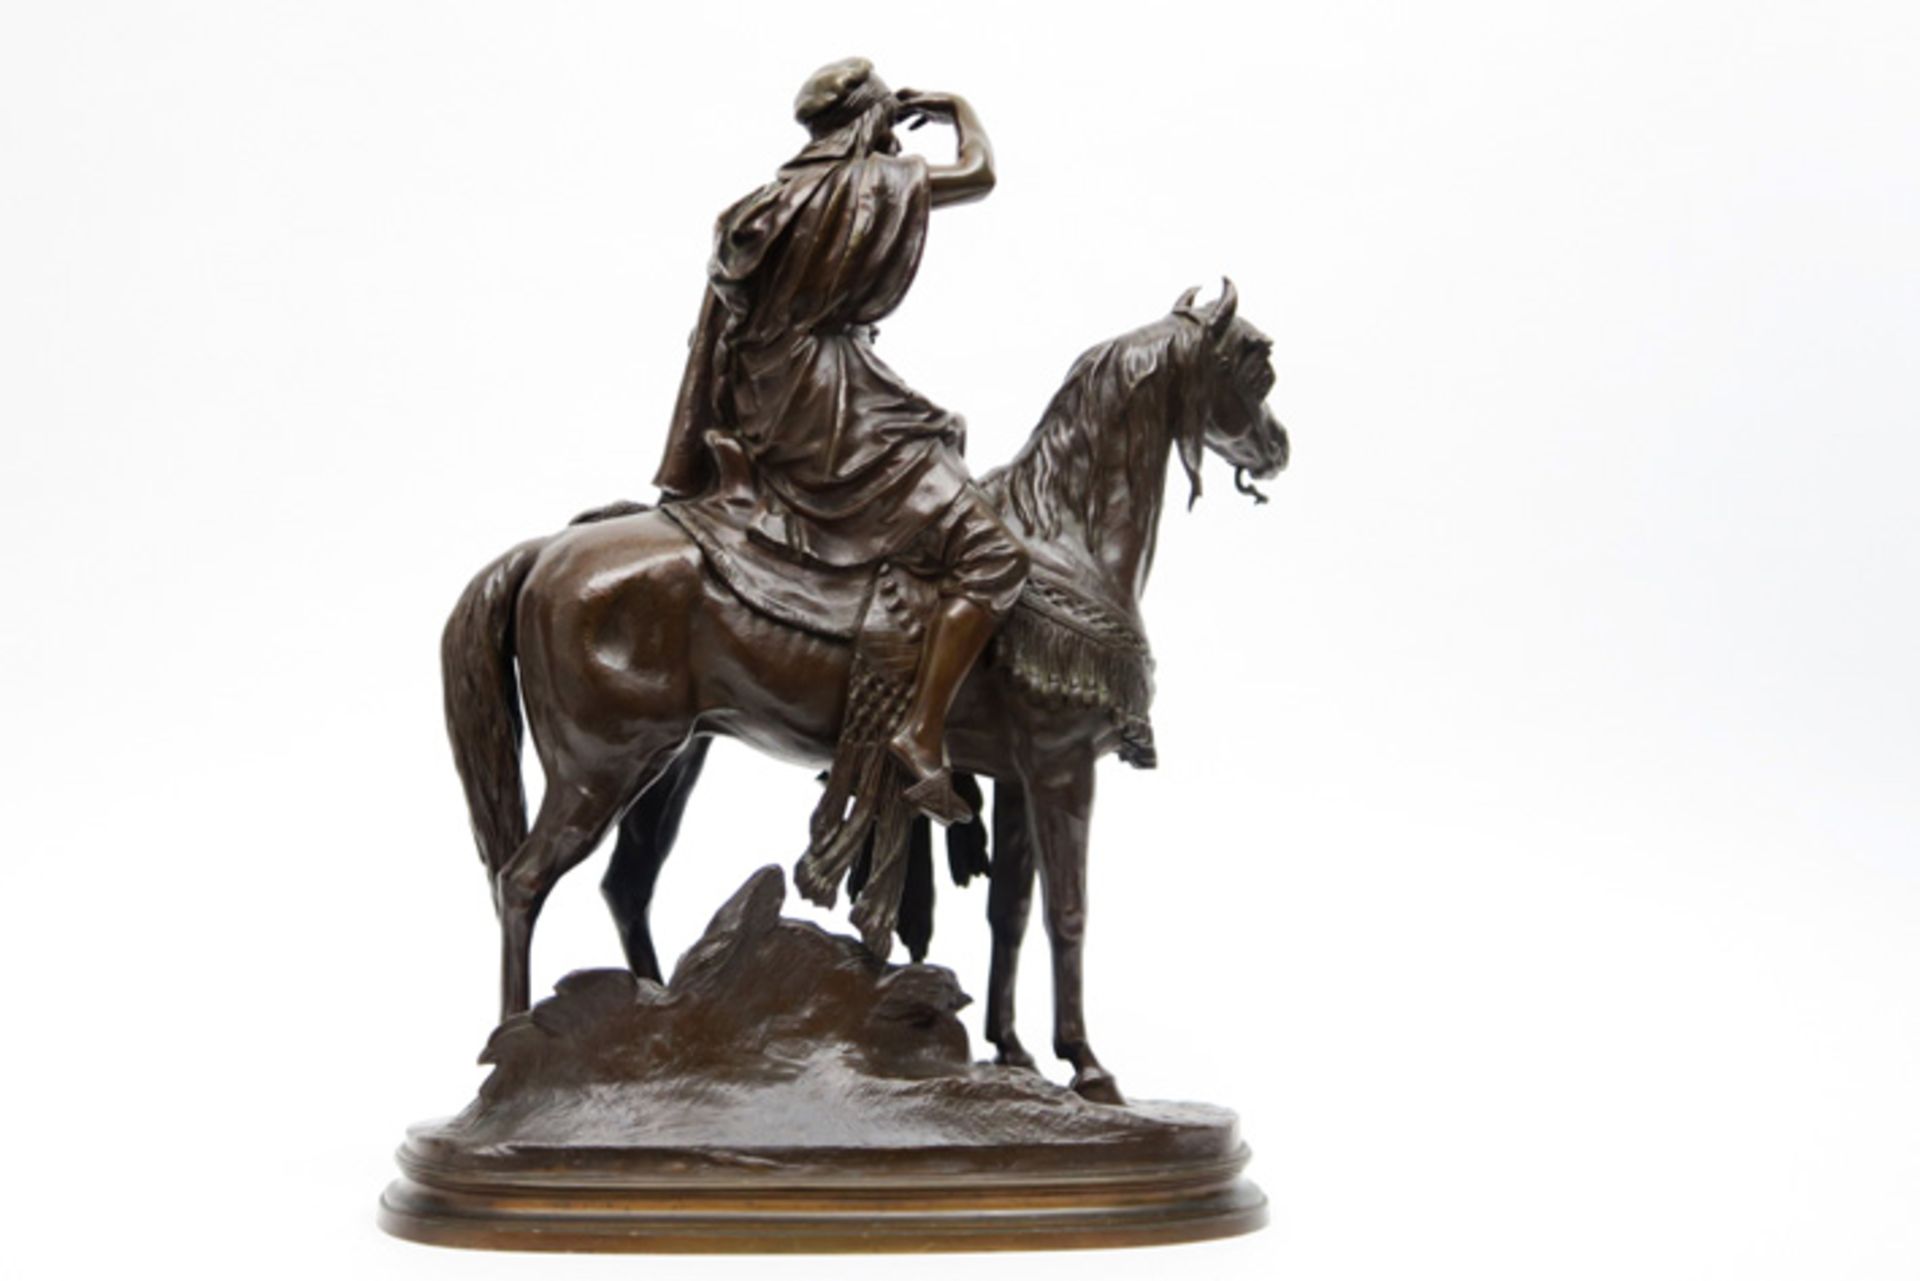 antique French orientalistic style "Arab on horse" sculpture in bronze - signed PAUTROT FERDINAND ( - Image 2 of 3